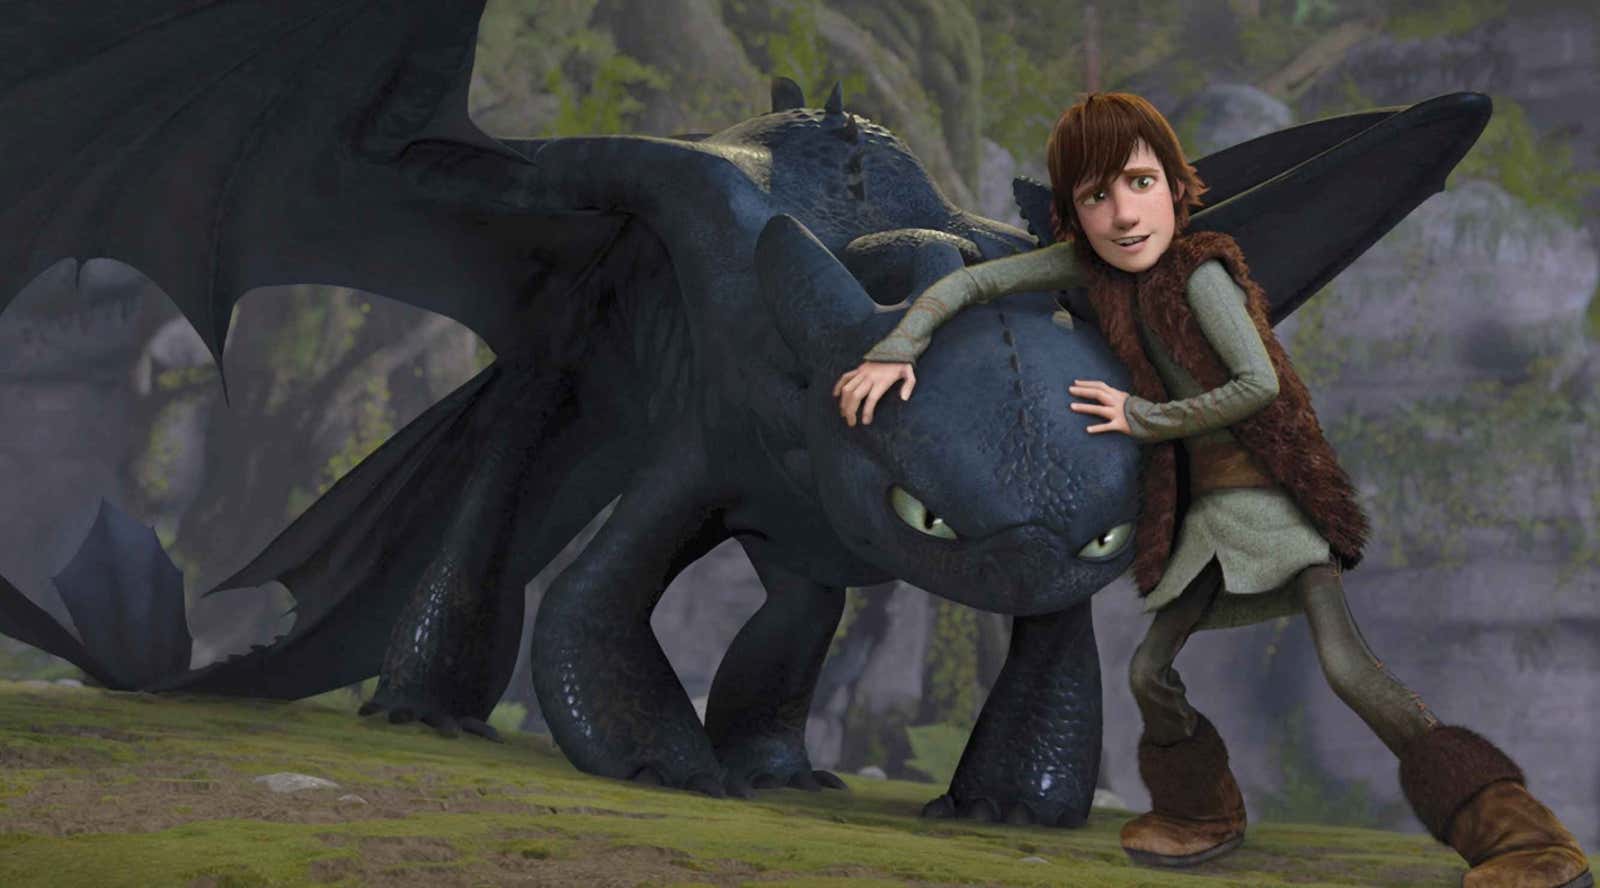 Live-Action ‘How To Train Your Dragon’ Is Taking Flight, Dean DeBlois To Direct